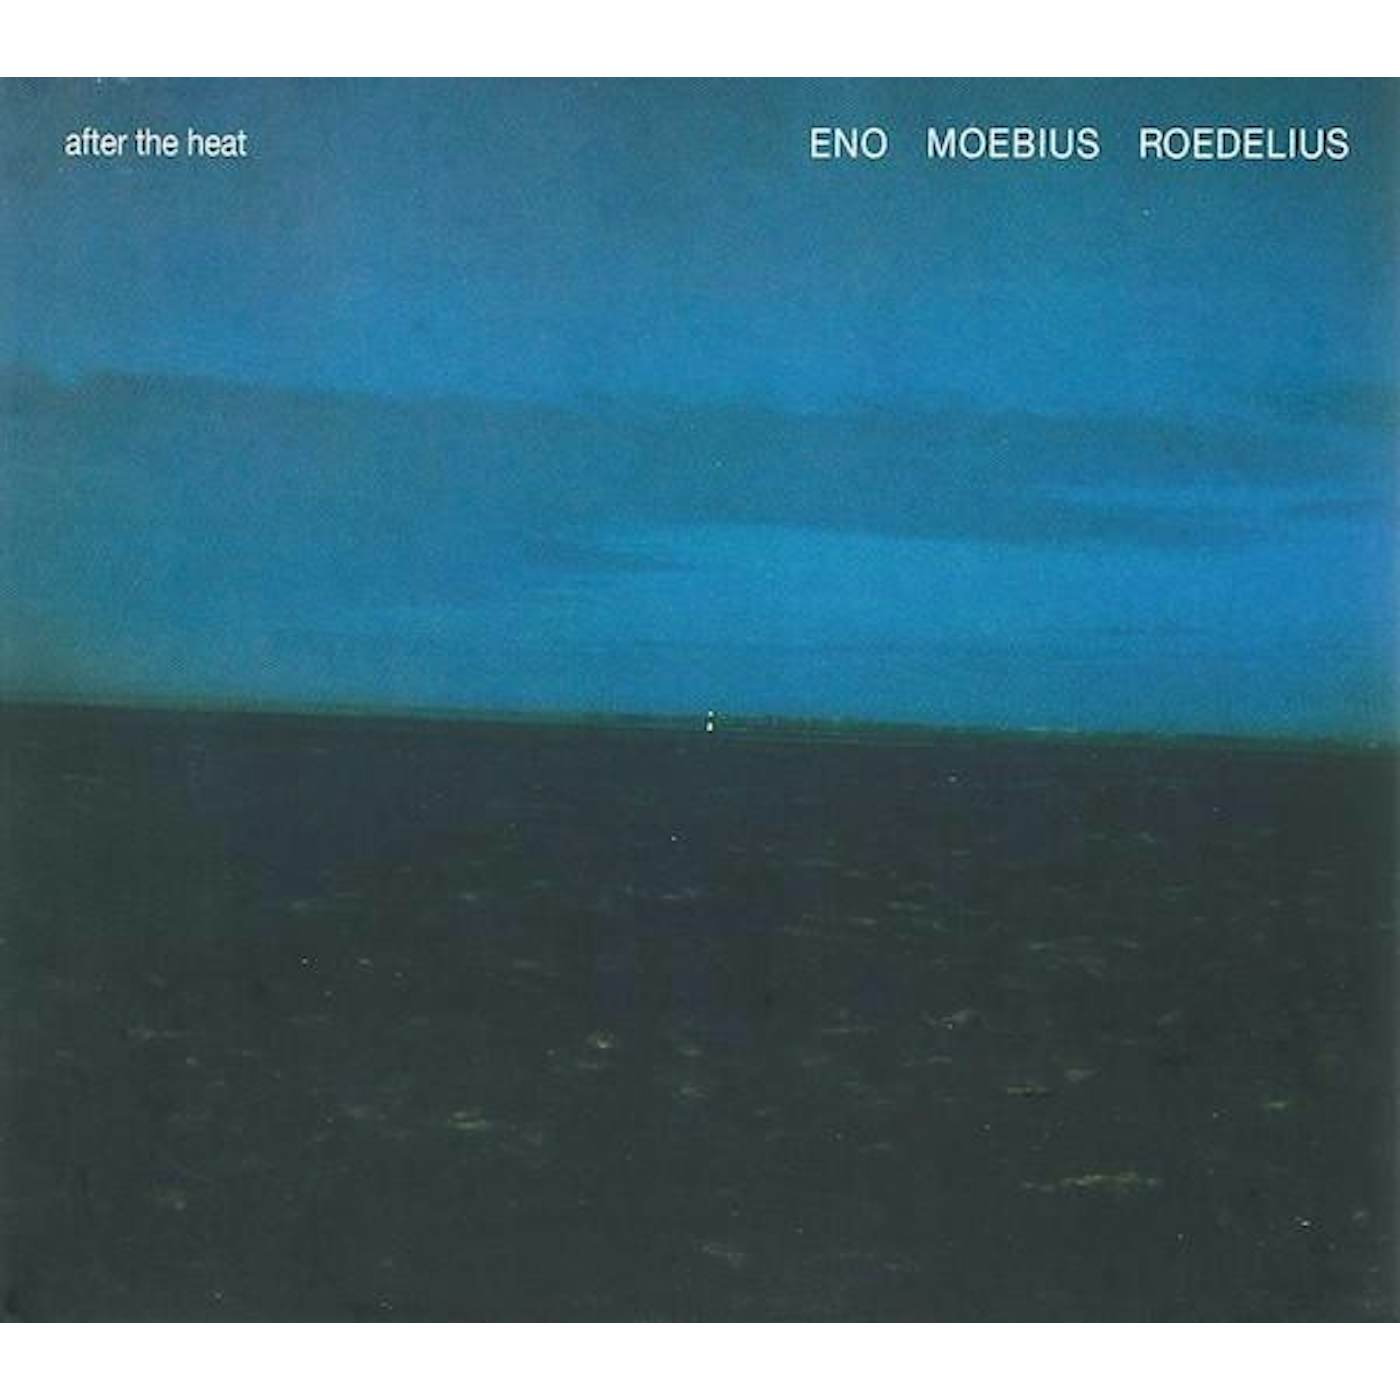 Eno Moebius Roedelius AFTER THE HEAT CD